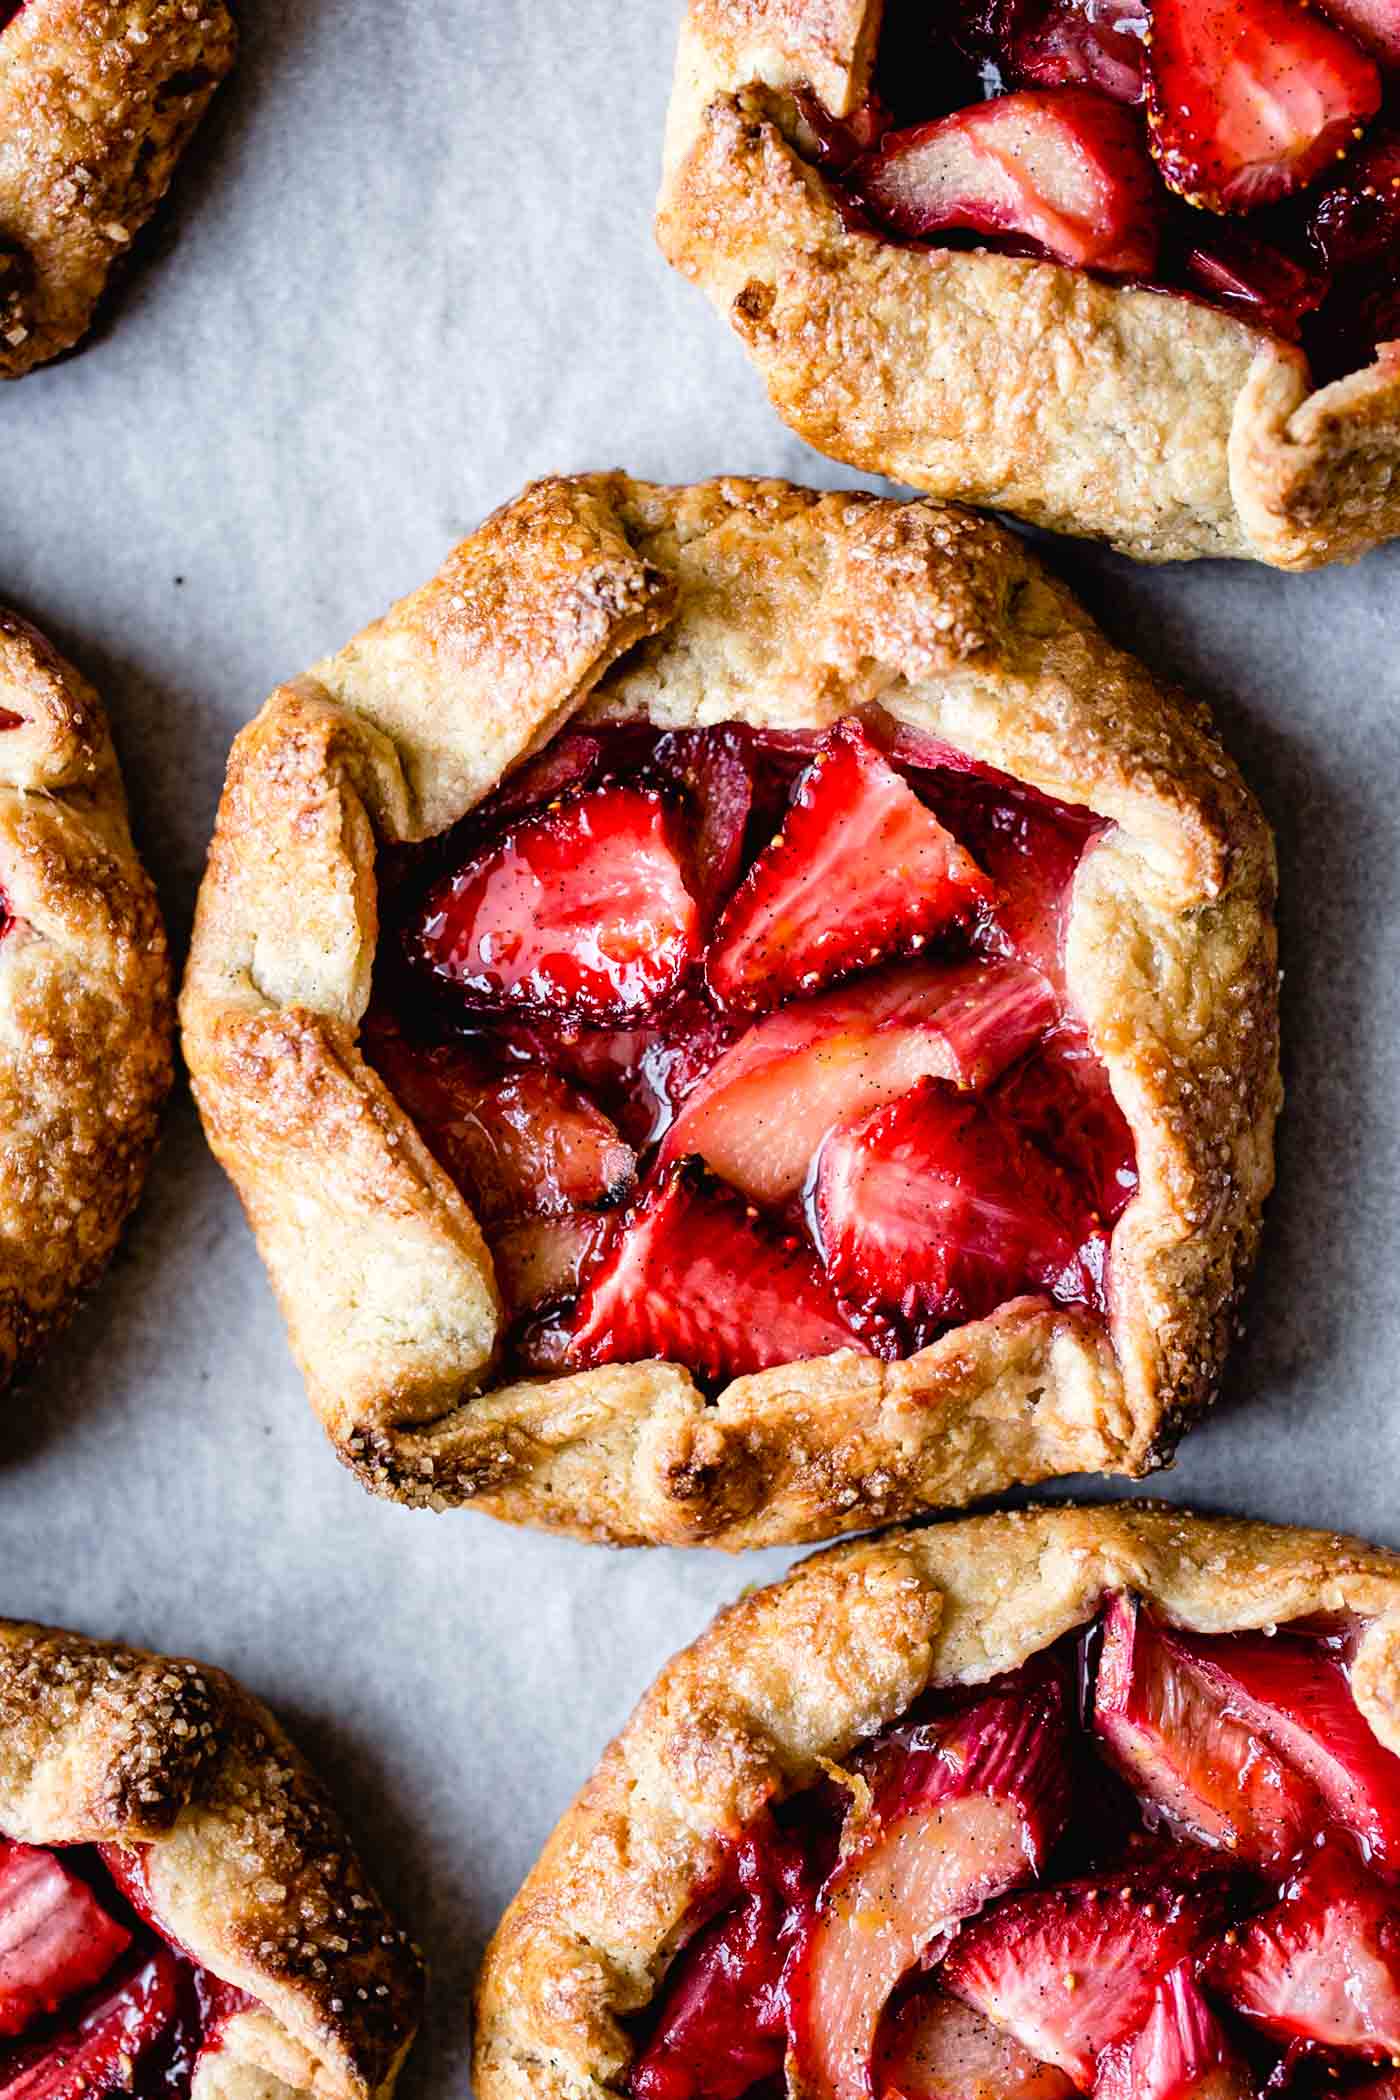 Cute mini galettes stuffed with berries and rhubarb are on a baking sheet